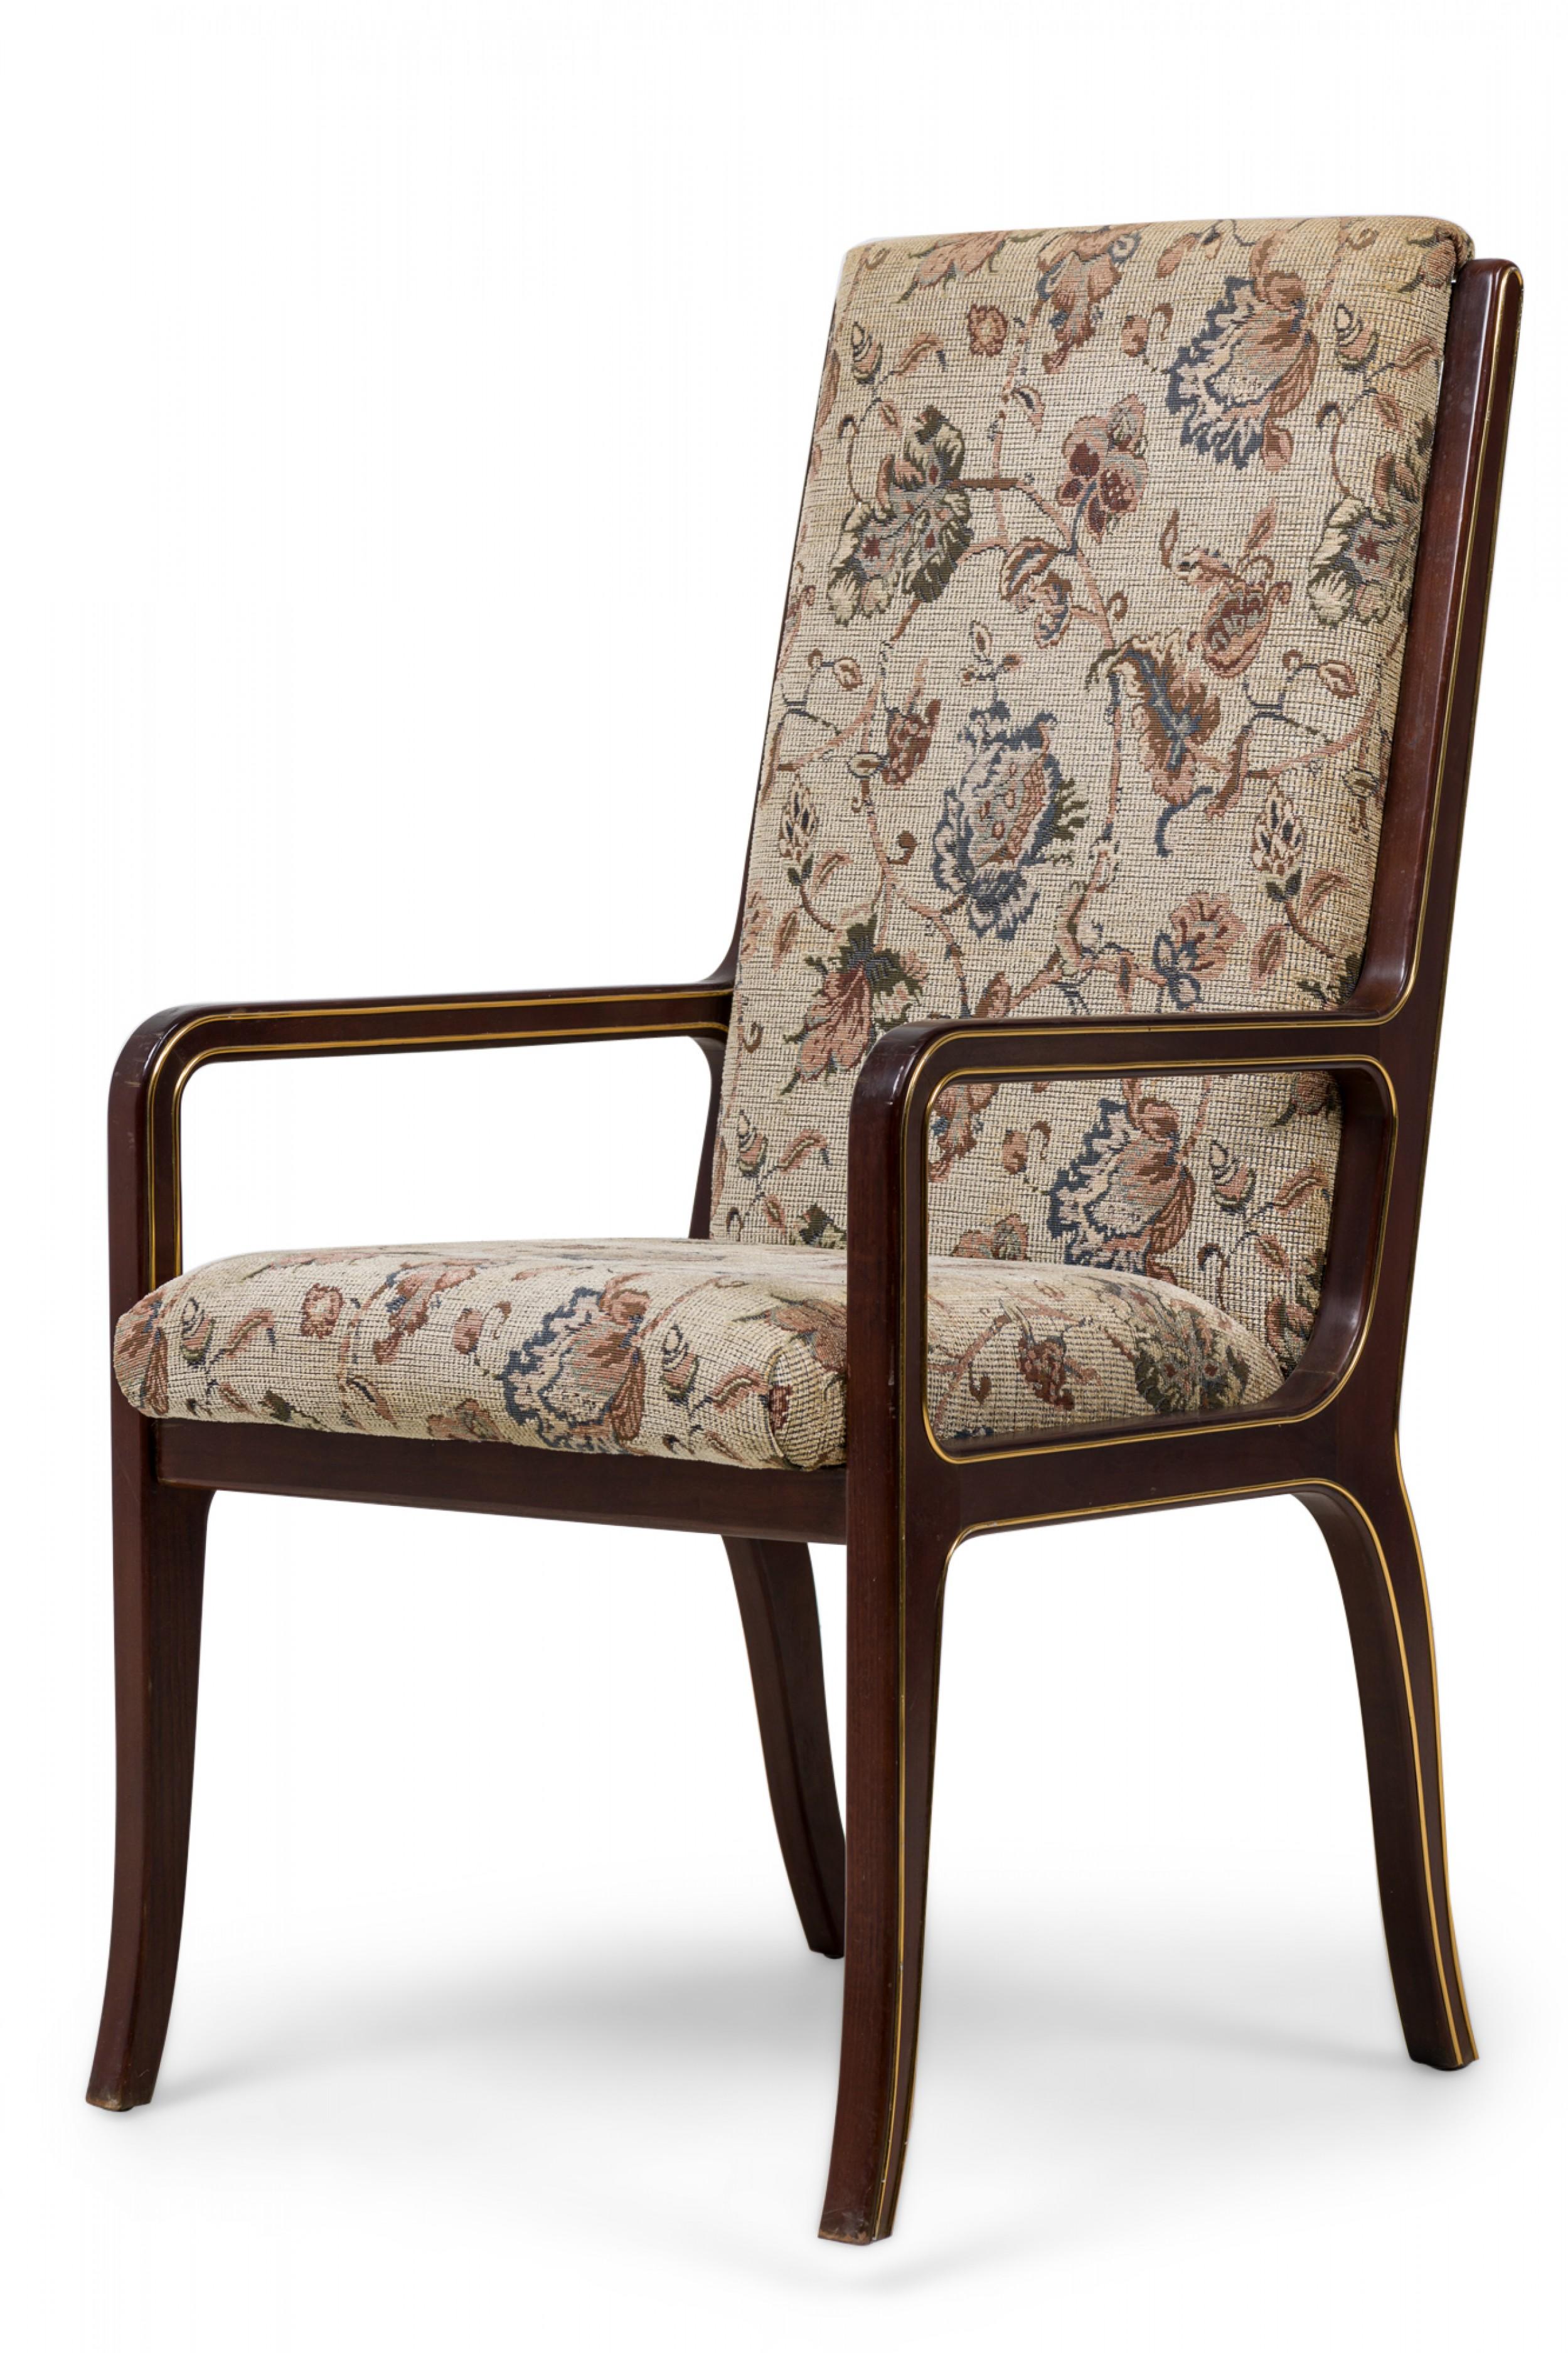 SET of 6 Mid-Century Neo-Classic (Russian) Style mahogany dining chairs (1 armchair, 5 side chairs) in molded form with brass trim along the sides and having high backs and seats upholstered in a brown and beige floral weave, standing on 2 splayed